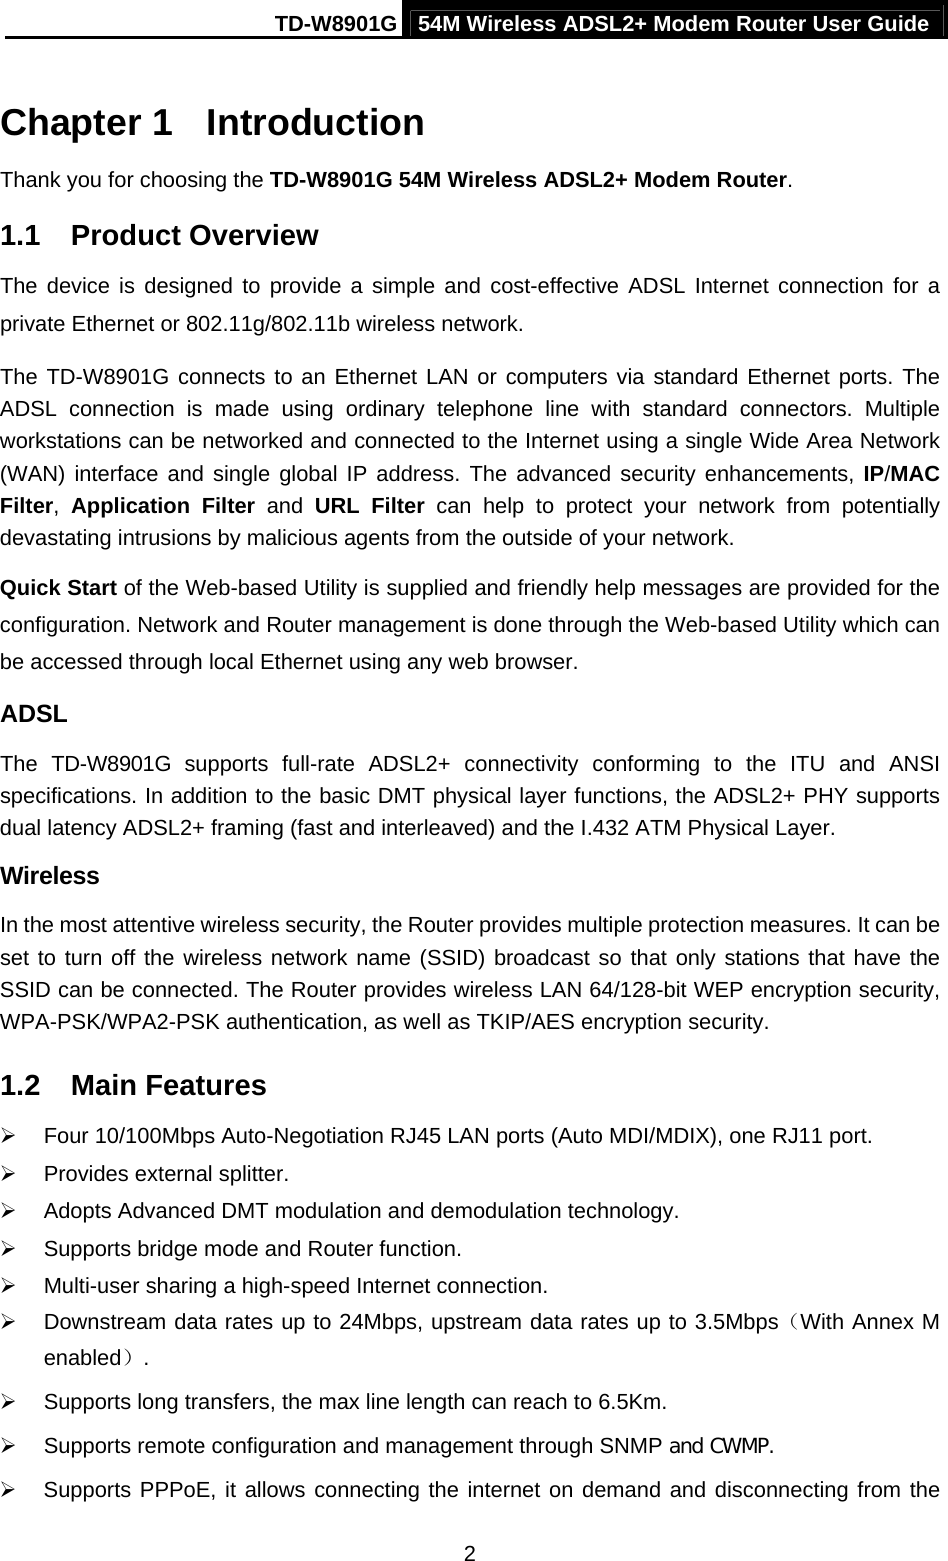 TD-W8901G 54M Wireless ADSL2+ Modem Router User Guide  2Chapter 1  Introduction Thank you for choosing the TD-W8901G 54M Wireless ADSL2+ Modem Router. 1.1  Product Overview The device is designed to provide a simple and cost-effective ADSL Internet connection for a private Ethernet or 802.11g/802.11b wireless network. The TD-W8901G connects to an Ethernet LAN or computers via standard Ethernet ports. The ADSL connection is made using ordinary telephone line with standard connectors. Multiple workstations can be networked and connected to the Internet using a single Wide Area Network (WAN) interface and single global IP address. The advanced security enhancements, IP/MAC Filter,  Application Filter and URL Filter can help to protect your network from potentially devastating intrusions by malicious agents from the outside of your network. Quick Start of the Web-based Utility is supplied and friendly help messages are provided for the configuration. Network and Router management is done through the Web-based Utility which can be accessed through local Ethernet using any web browser. ADSL The TD-W8901G supports full-rate ADSL2+ connectivity conforming to the ITU and ANSI specifications. In addition to the basic DMT physical layer functions, the ADSL2+ PHY supports dual latency ADSL2+ framing (fast and interleaved) and the I.432 ATM Physical Layer. Wireless In the most attentive wireless security, the Router provides multiple protection measures. It can be set to turn off the wireless network name (SSID) broadcast so that only stations that have the SSID can be connected. The Router provides wireless LAN 64/128-bit WEP encryption security, WPA-PSK/WPA2-PSK authentication, as well as TKIP/AES encryption security. 1.2  Main Features ¾  Four 10/100Mbps Auto-Negotiation RJ45 LAN ports (Auto MDI/MDIX), one RJ11 port. ¾  Provides external splitter. ¾  Adopts Advanced DMT modulation and demodulation technology. ¾  Supports bridge mode and Router function. ¾  Multi-user sharing a high-speed Internet connection. ¾  Downstream data rates up to 24Mbps, upstream data rates up to 3.5Mbps（With Annex M enabled）. ¾  Supports long transfers, the max line length can reach to 6.5Km. ¾  Supports remote configuration and management through SNMP and CWMP. ¾  Supports PPPoE, it allows connecting the internet on demand and disconnecting from the 